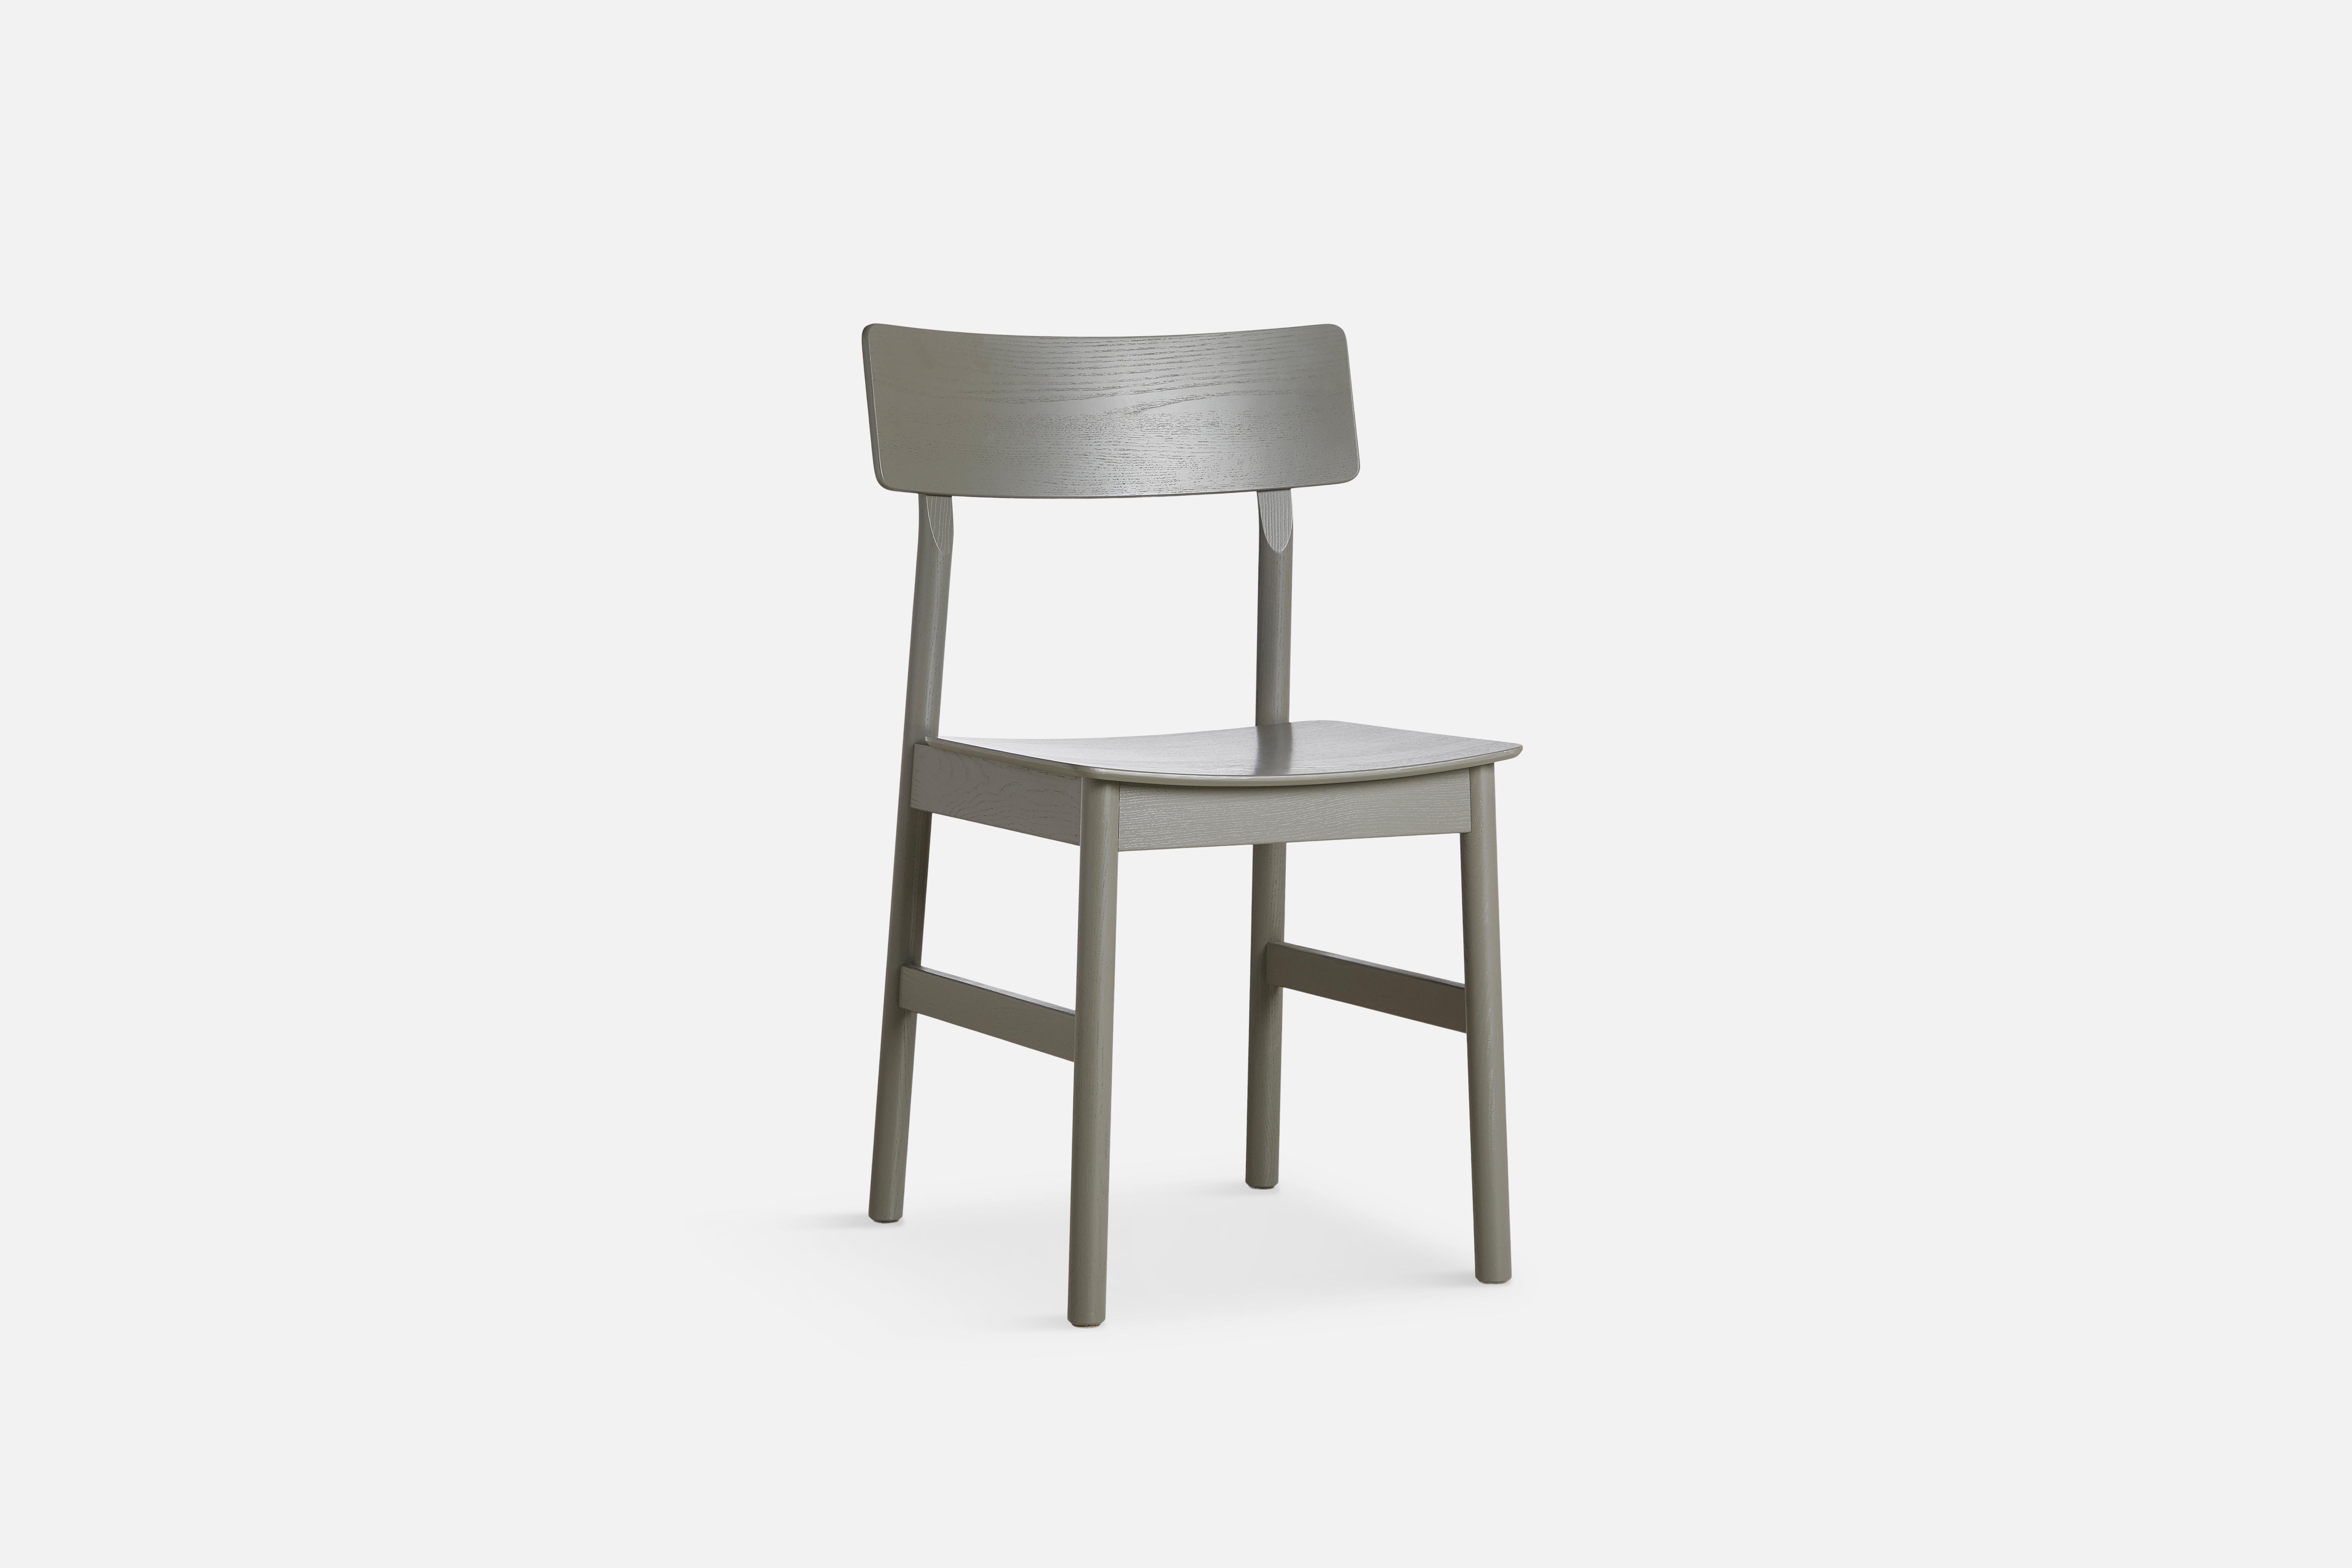 Pause Taupe dining chair 2.0 by Kasper Nyman
Materials: Ash, plywood
Dimensions: D 47 x W 48 x H 80 cm
Also available in different colours and finishes.

The founders, Mia and Torben Koed, decided to put their 30 years of experience into a new